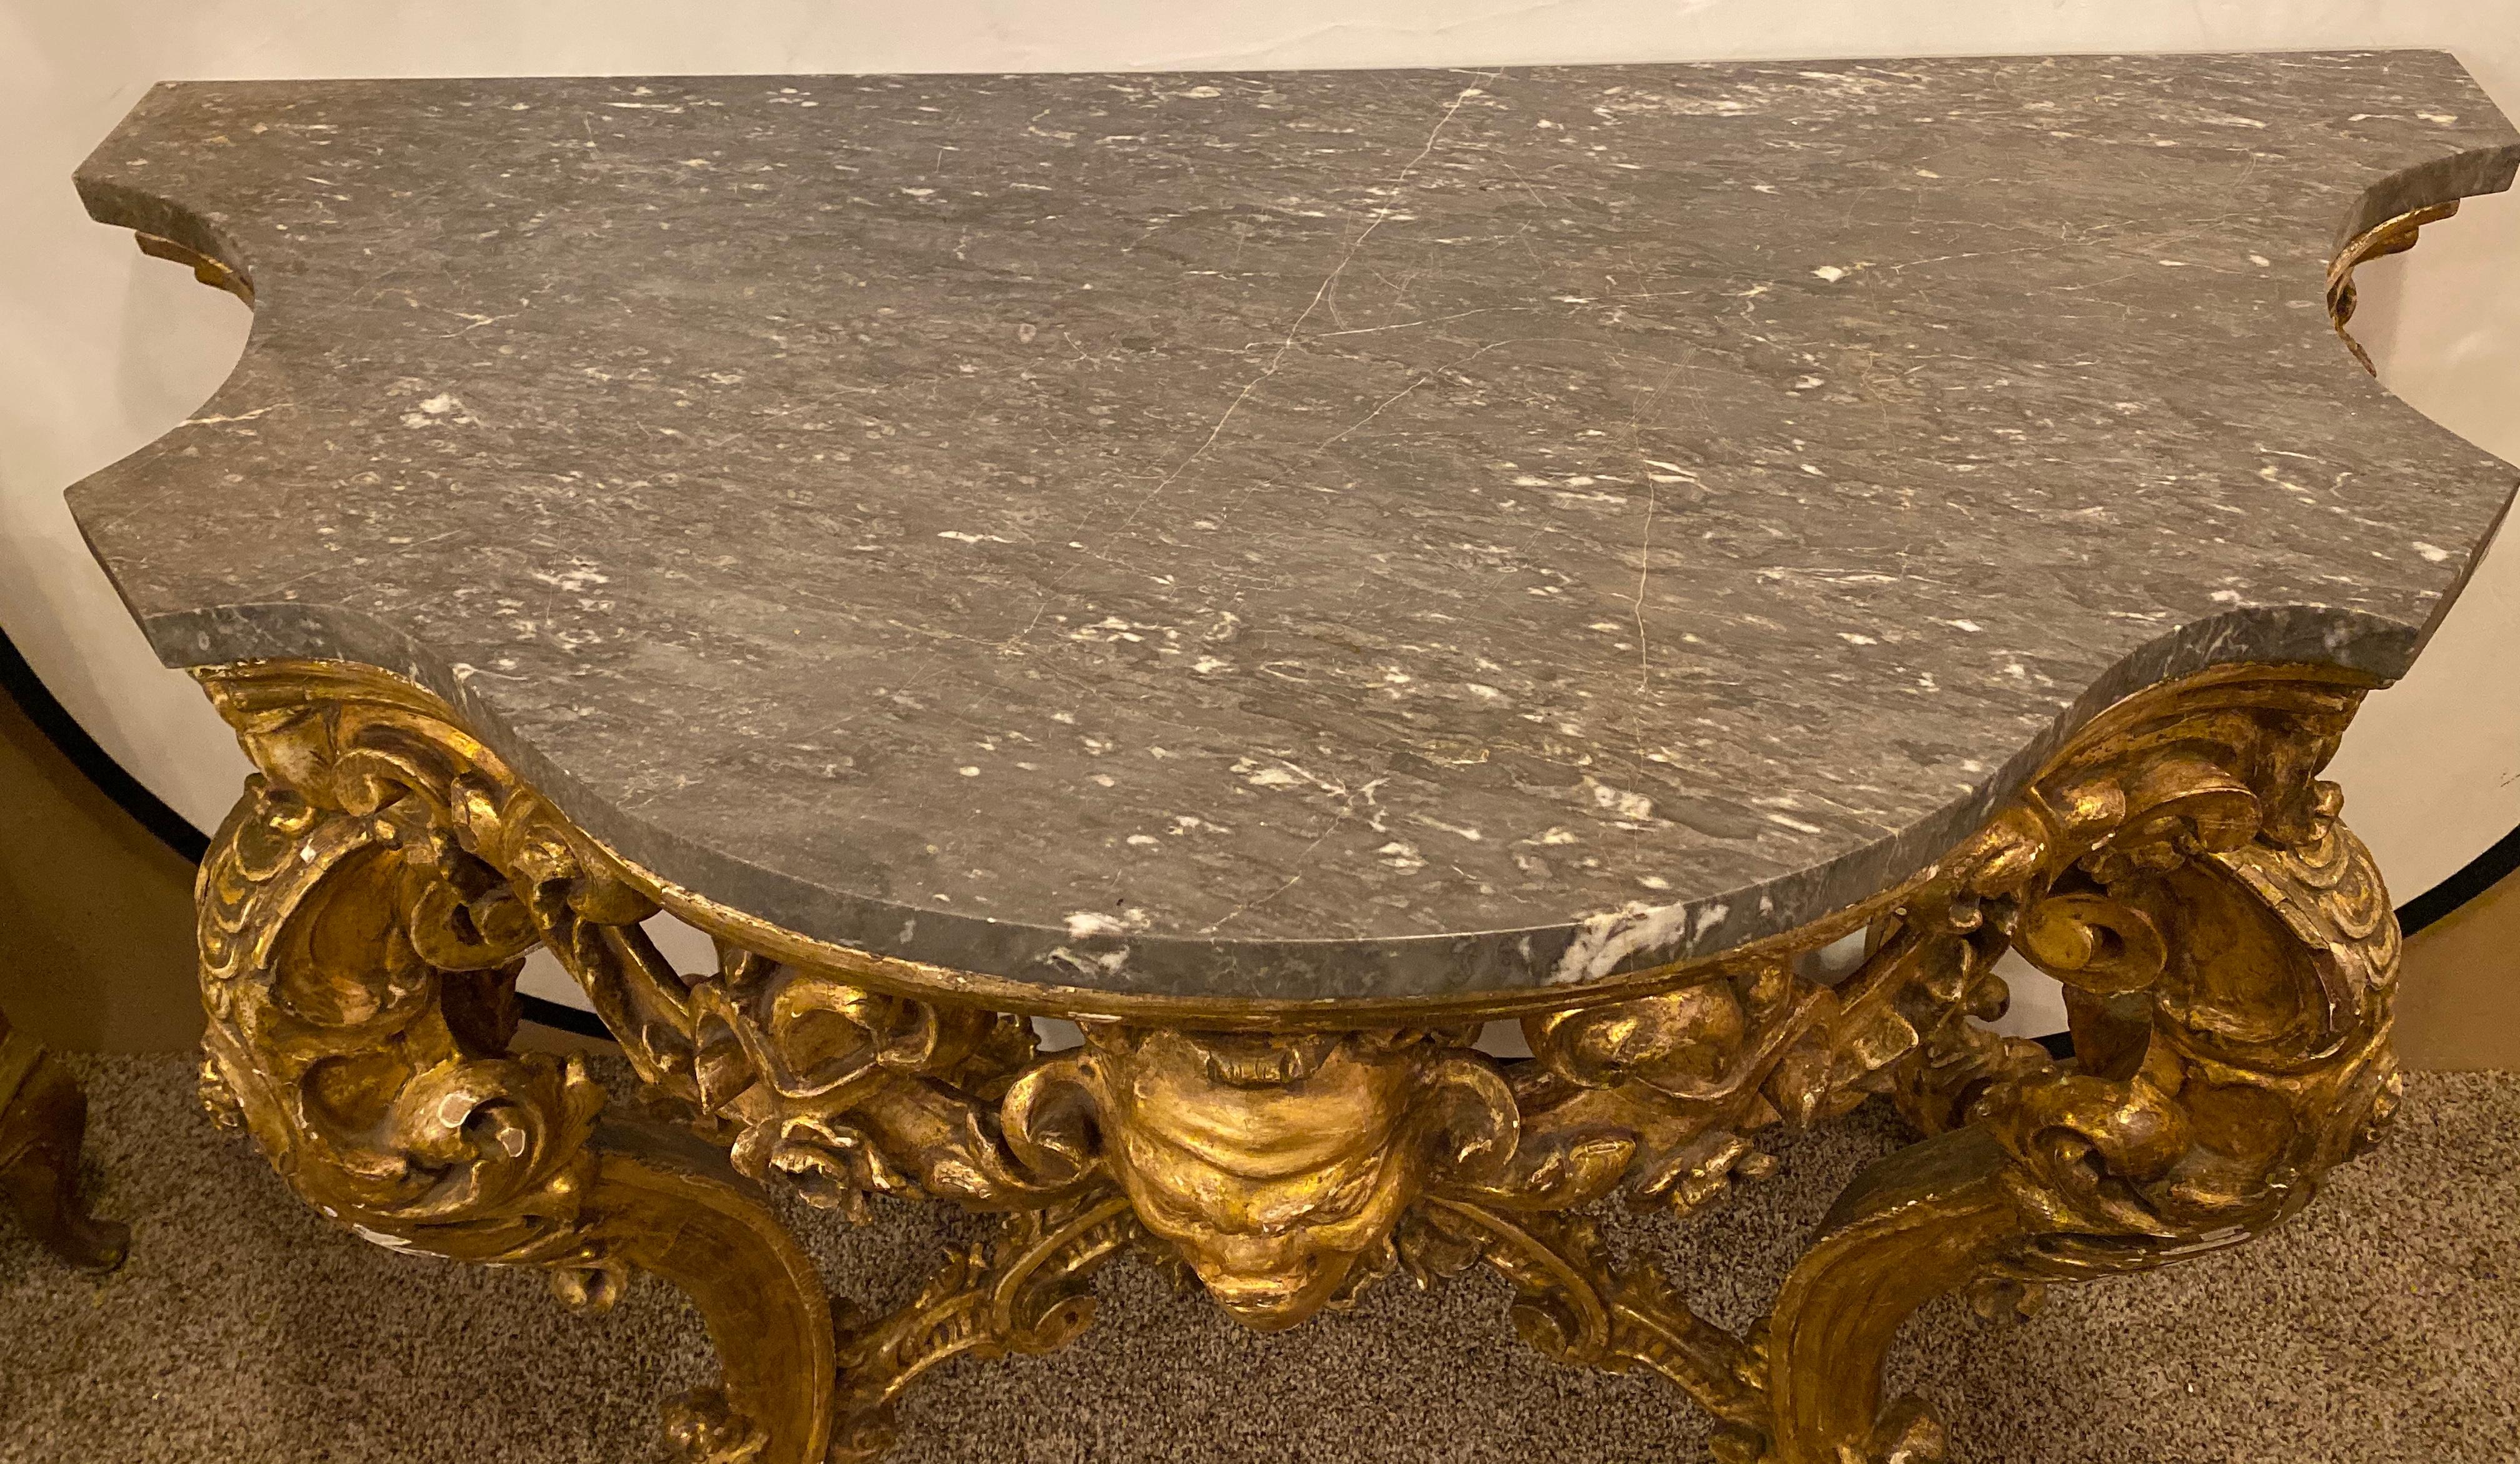 Marble 19th Century Venetian Gilt Gold Console Table, Serpentine, Ornately Carved